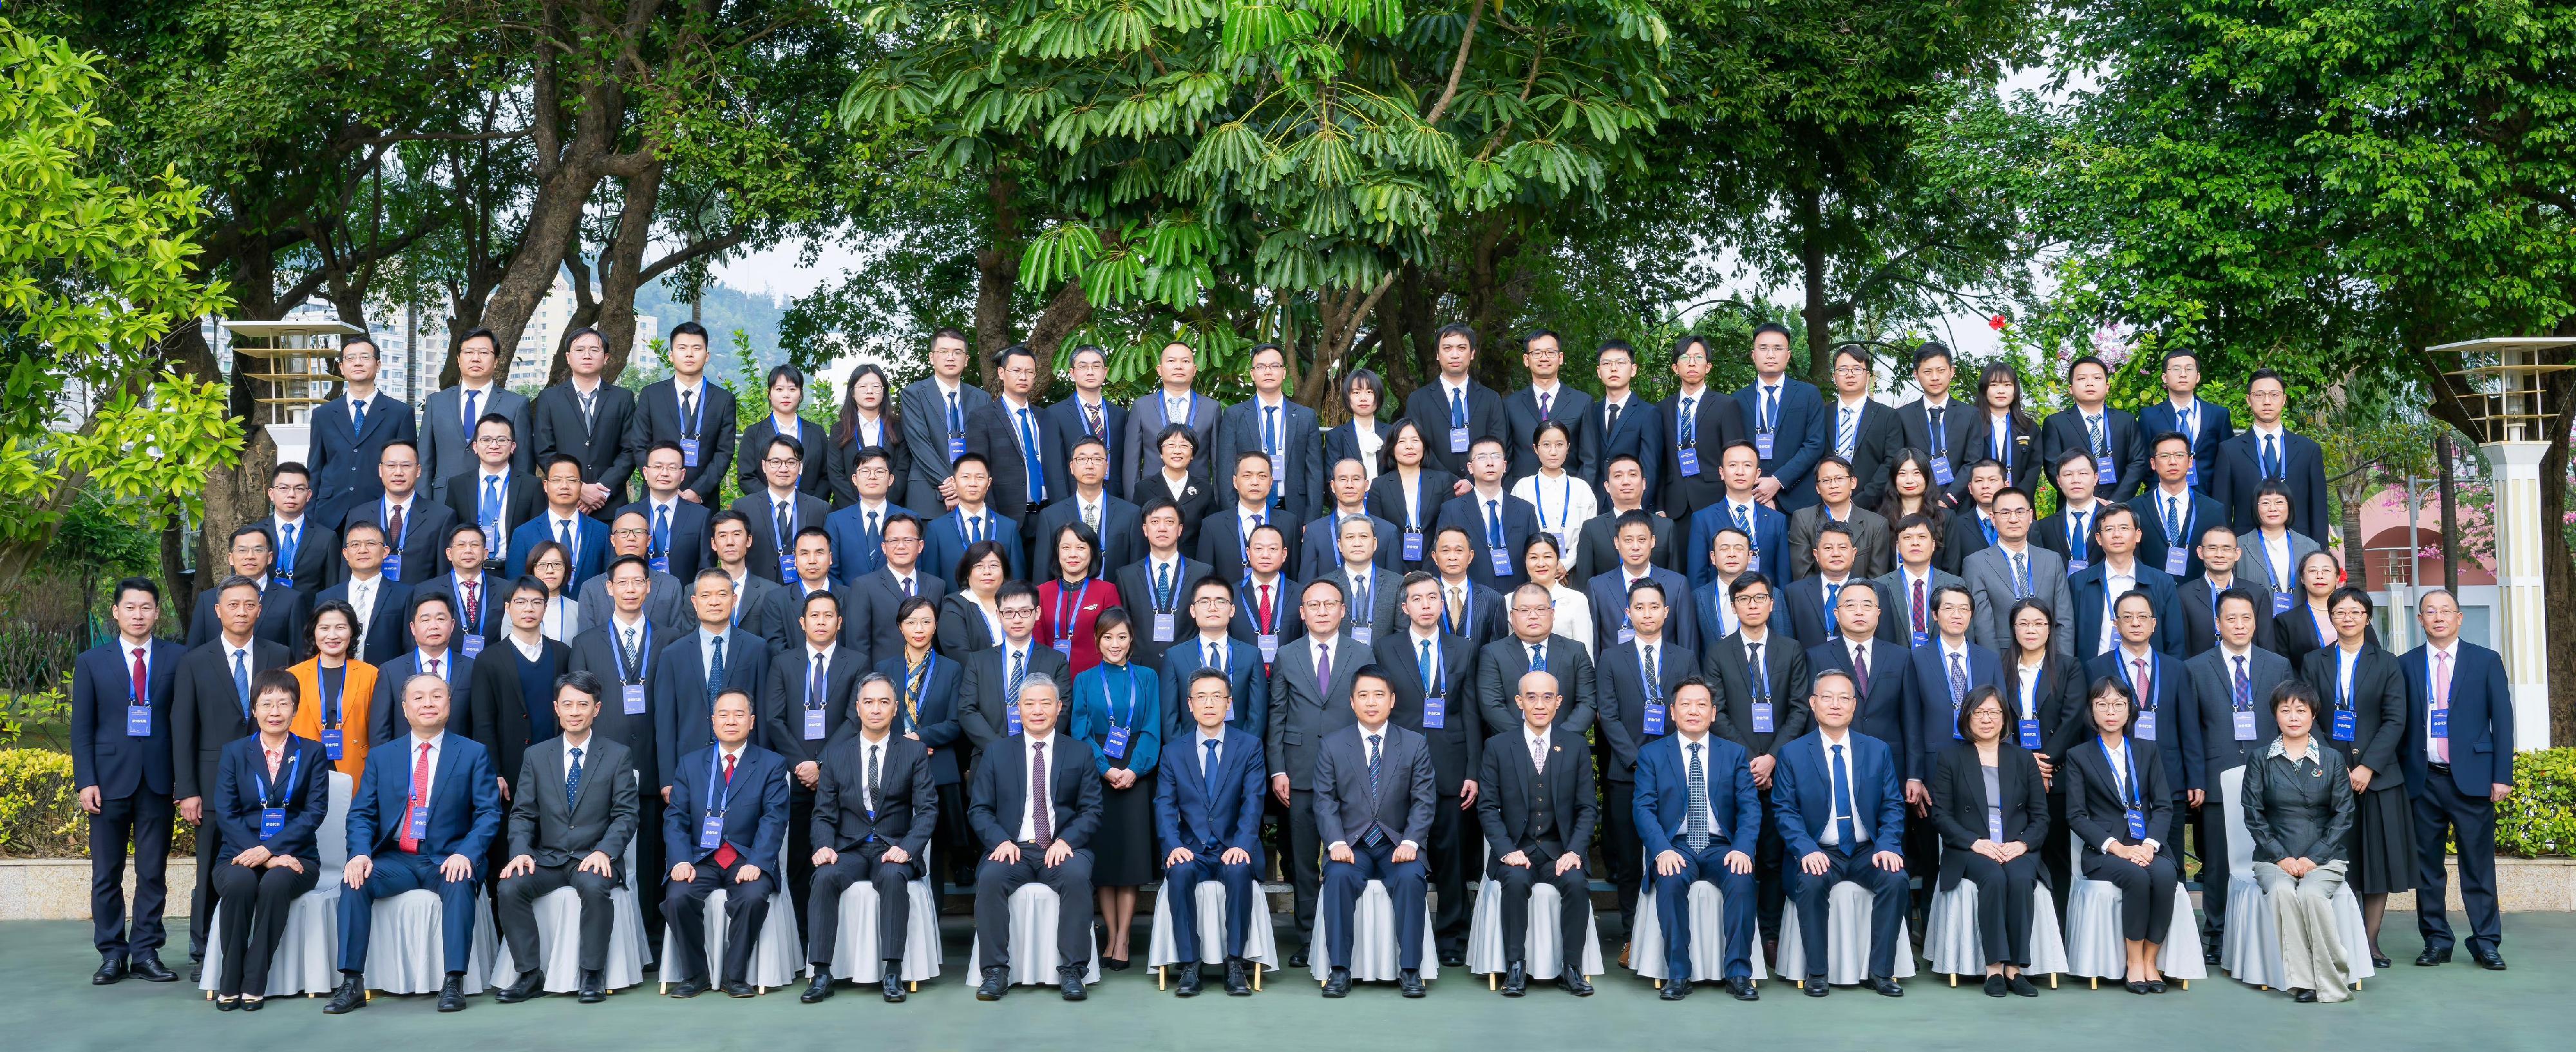 The Director of Audit, Professor Nelson Lam, led a delegation of Audit Commission officers to Zhuhai to attend the 7th Guangdong-Hong Kong-Macao Audit Conference 2023 held December 6 to 8. The Director of Hong Kong, Macao and Taiwan Offices of the National Audit Office, Mr Jiang Haiying (first row, seventh left); Deputy Secretary of the Communist Party of China Zhuhai Municipal Committee and the Mayor of the Zhuhai Municipal Government, Mr Huang Zhihao (first row, seventh right); the Secretary of the Leading Party Members’ Group and Director of the Audit Office of Guangdong Province, Mr Ma Xuebin (first row, sixth left); the Commissioner of Audit of Macao Special Administrative Region, Mr Ho Veng-on (first row, fifth left); Deputy Director General of the Hong Kong and Macao Affairs Office of the People's Government of Guangdong Province Mr Huang Duanlian (first row, fifth right); and Professor Lam (first row, sixth right), gather with members of the auditing profession.